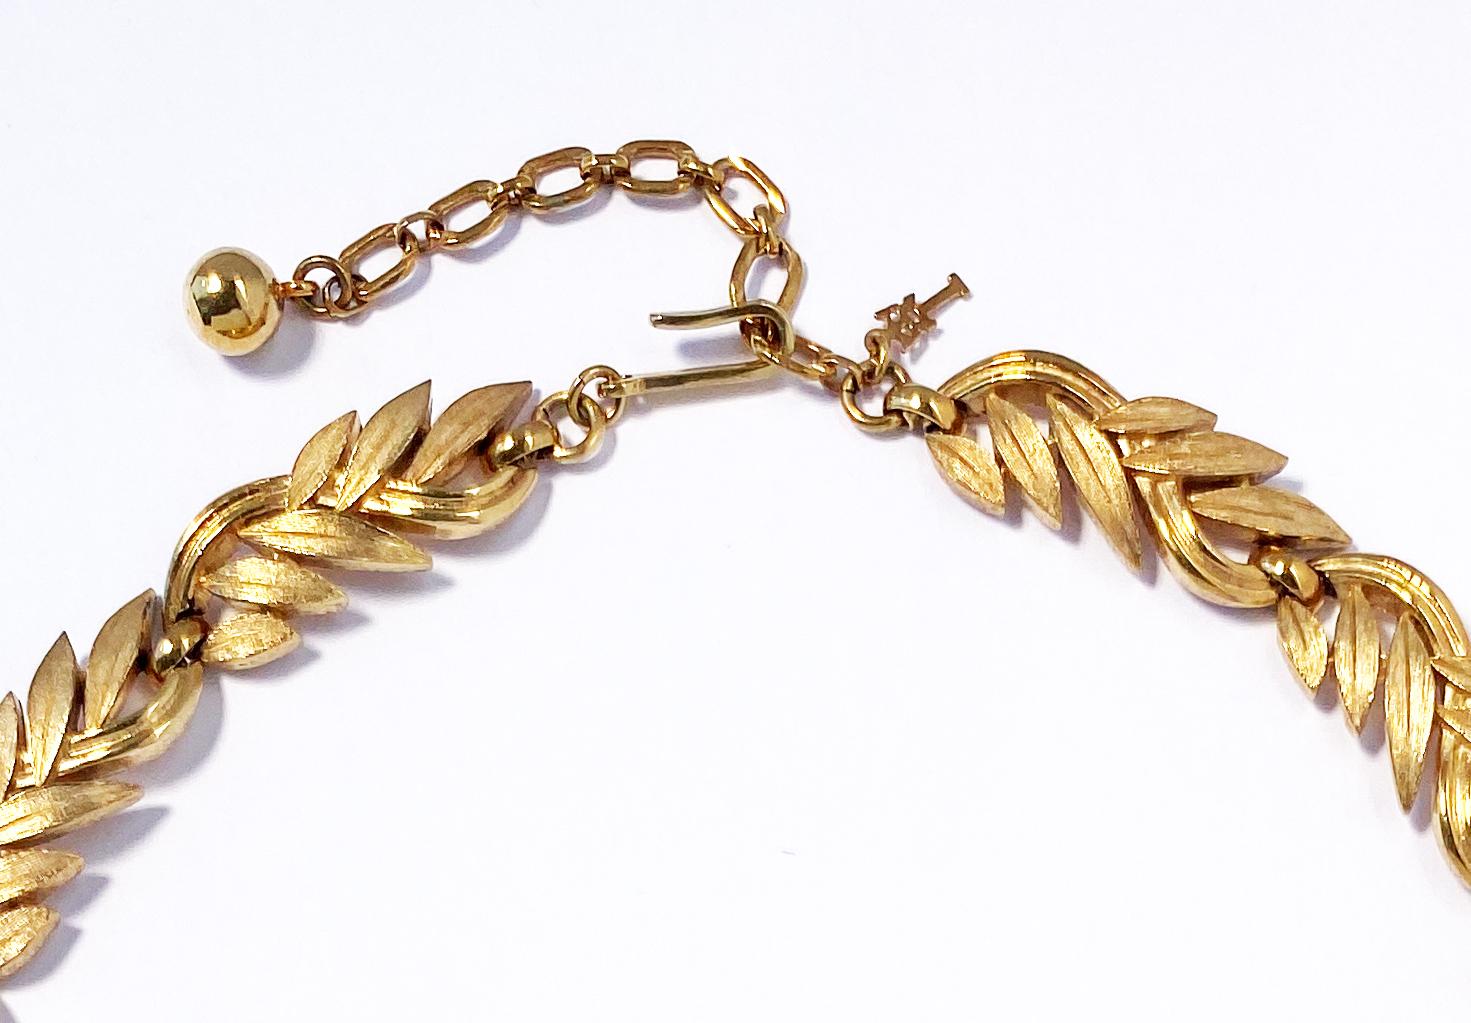 Vintage 1960s Trifari botanical motif leaf necklace in gold plate.  This collar-style heritage necklace comprises an interlocking leaf and stem design featuring a combination of brushed and high-polish finishes for an appealingly tactile effect. 